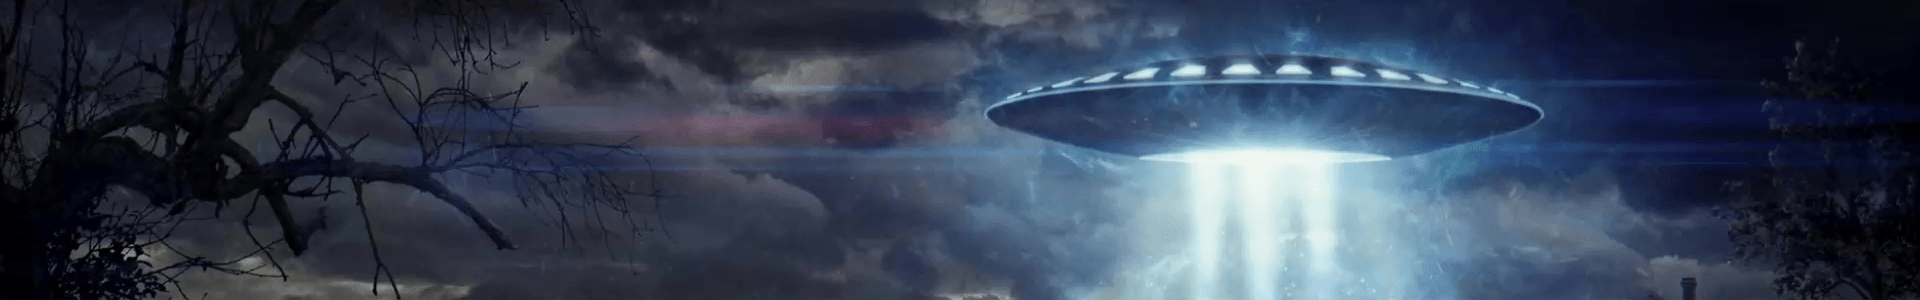 What Are the Odds of Seeing a UFO in Each Canadian Province?